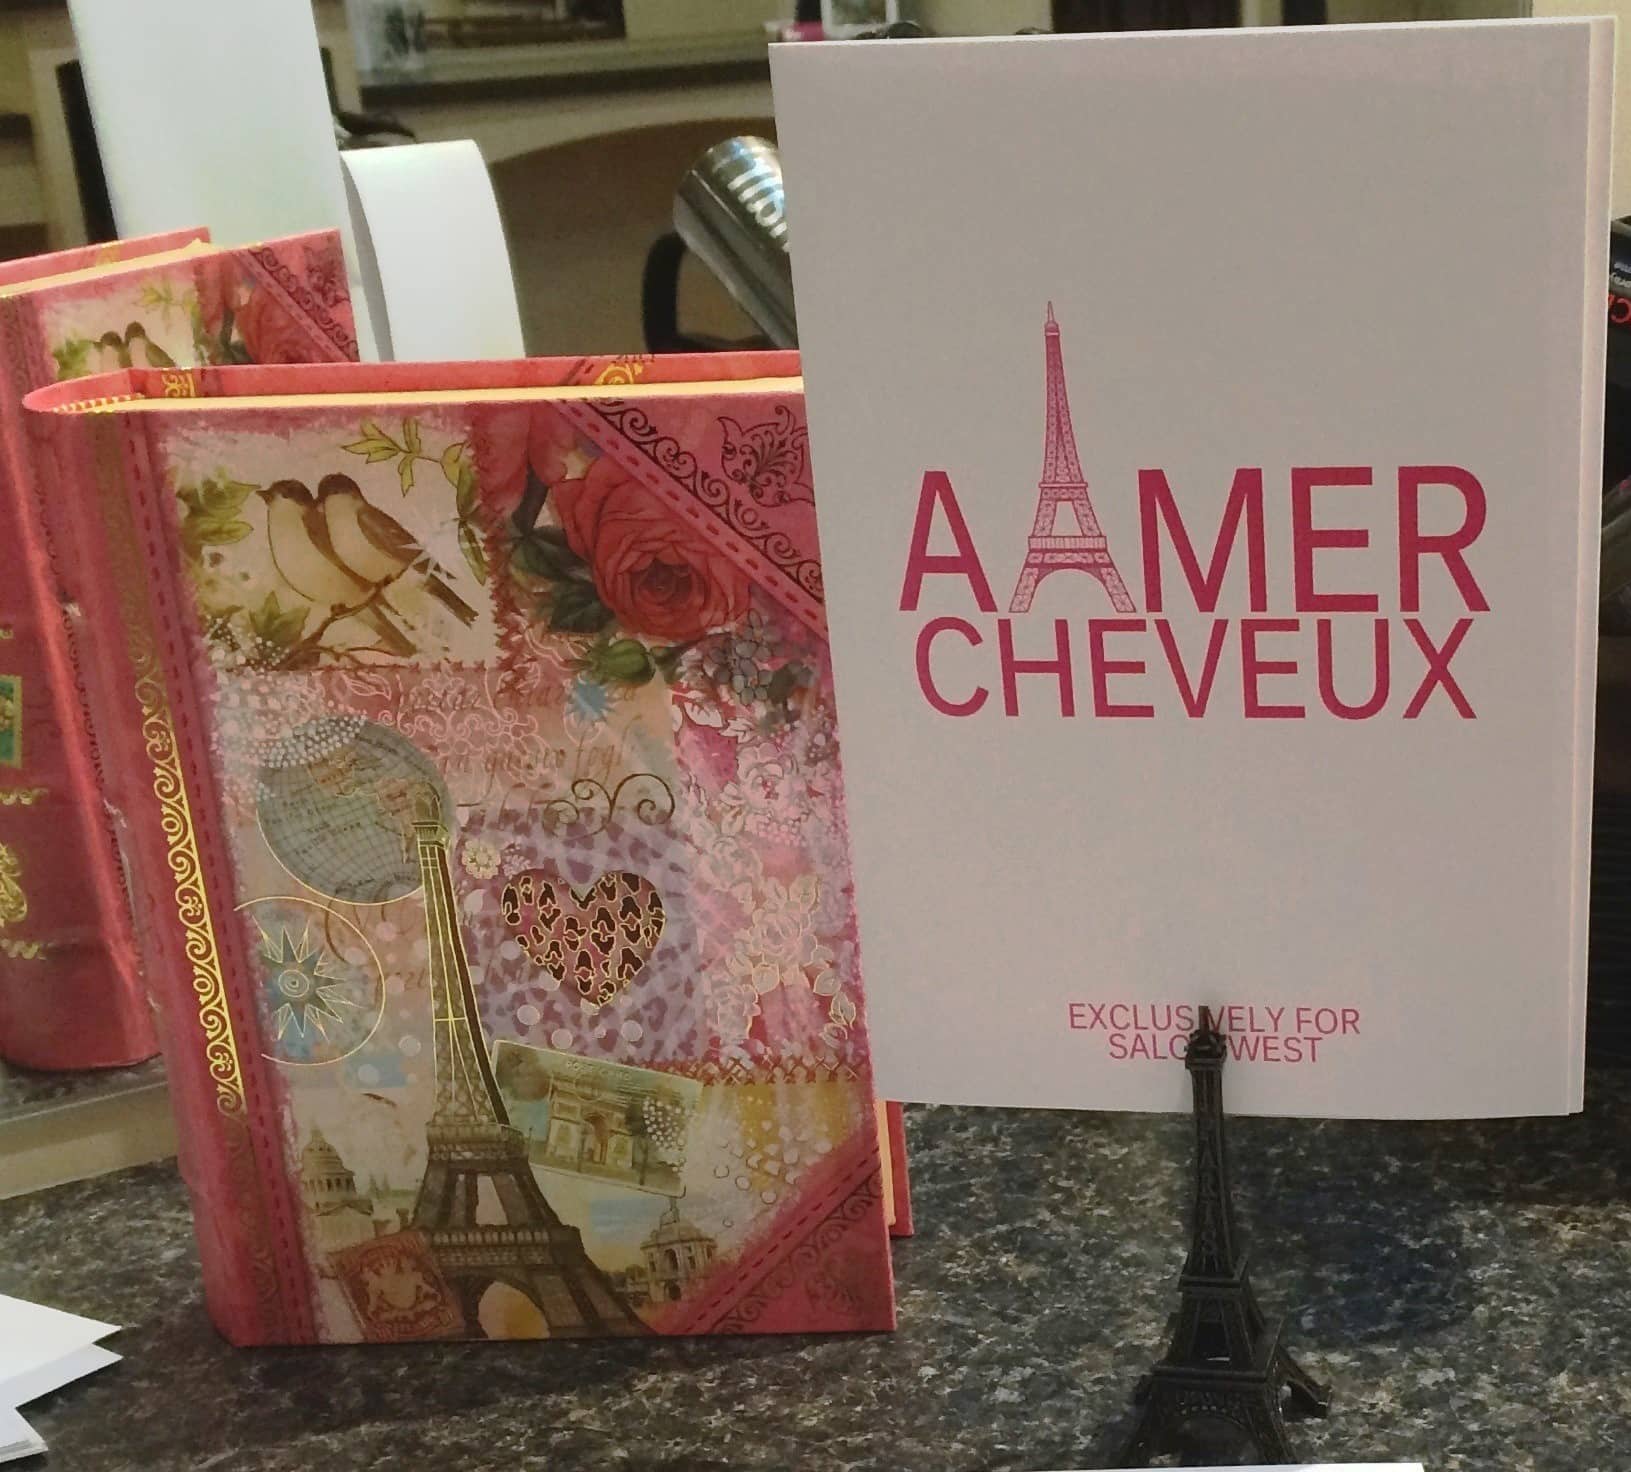 Aimer Cheveux display launch.